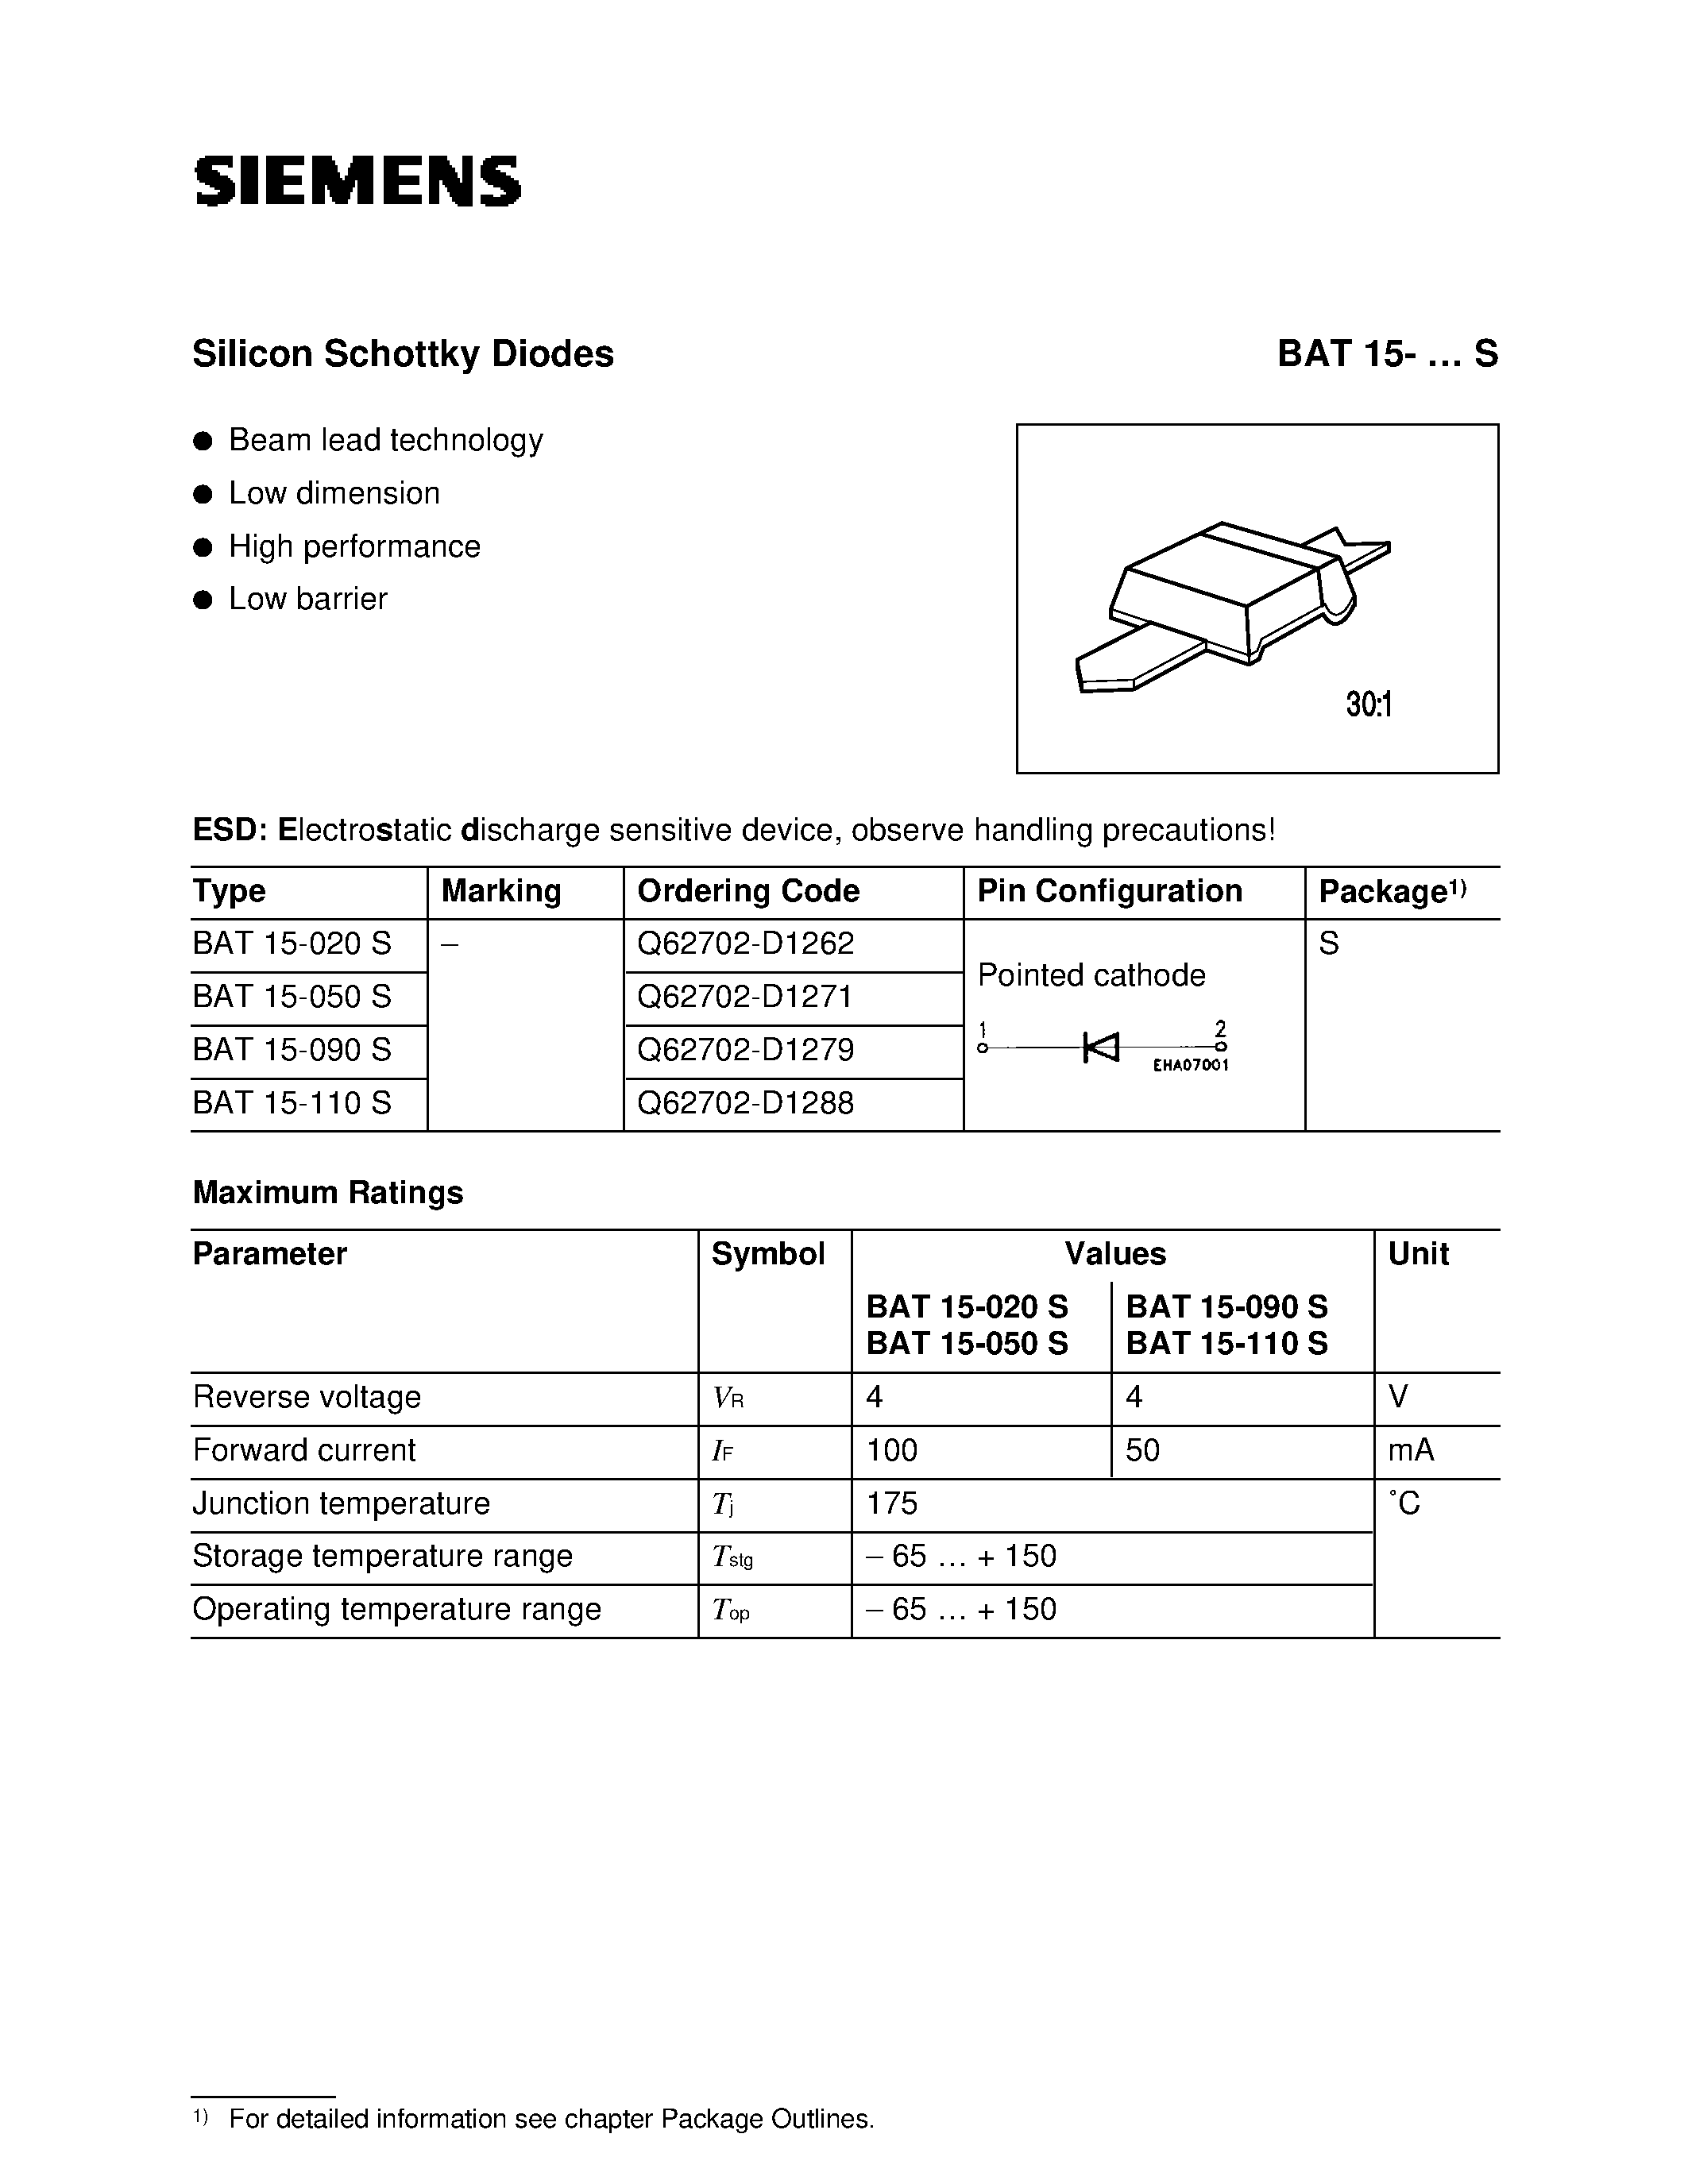 Datasheet BAT15-020S - Silicon Schottky Diodes (Beam lead technology Low dimension High performance Low barrier) page 1